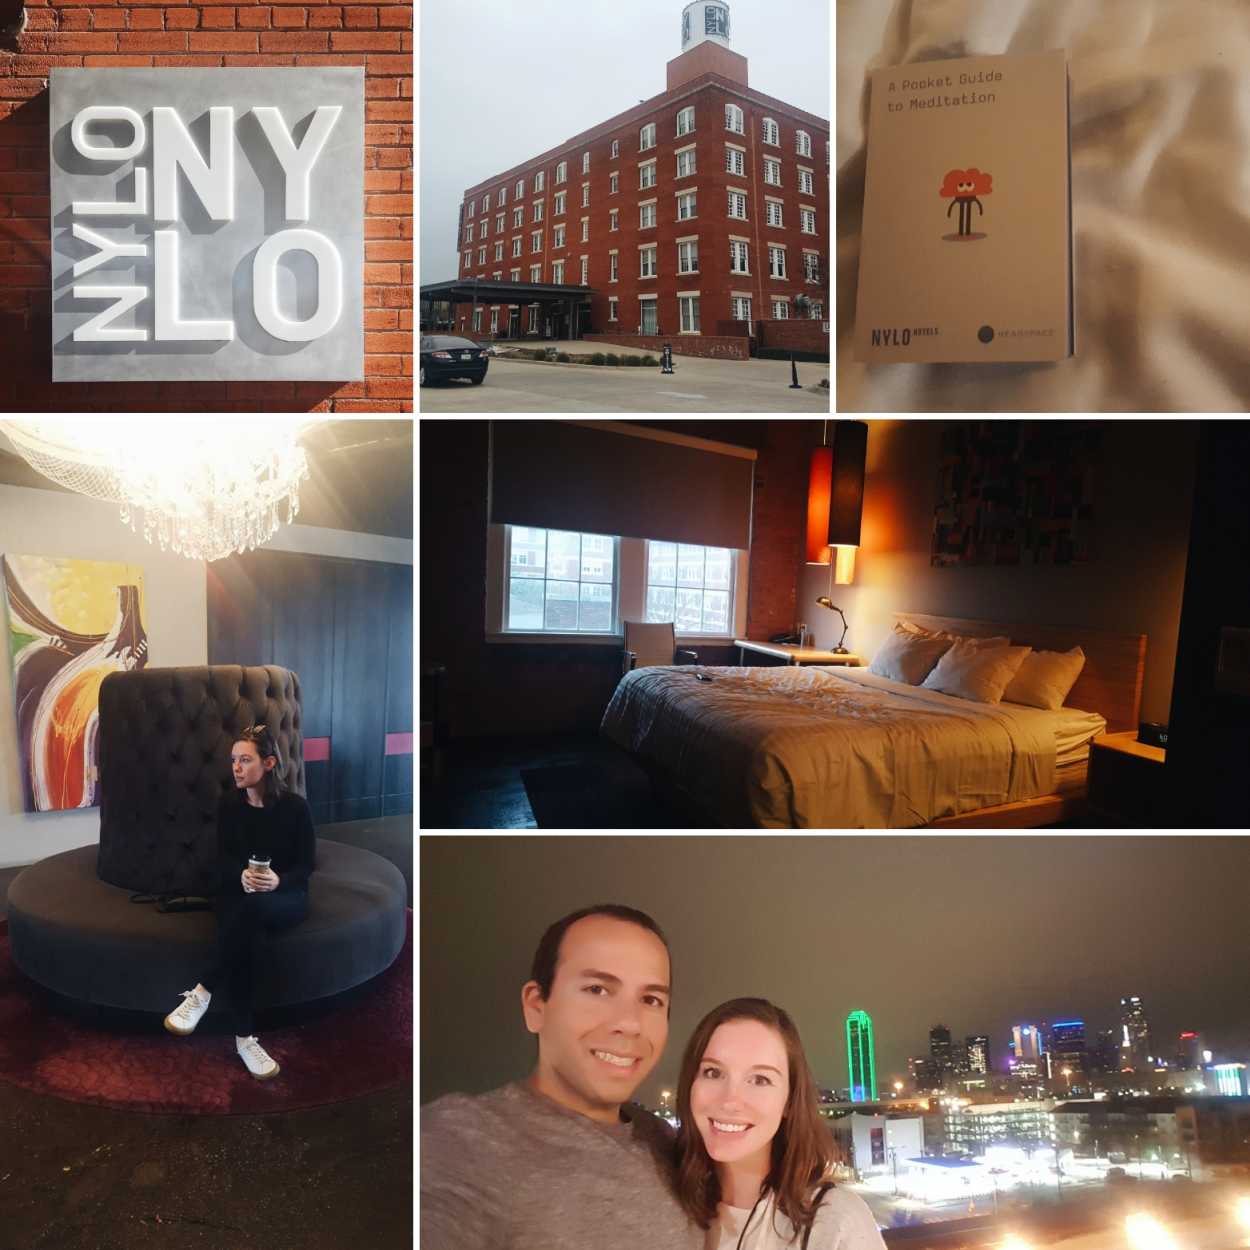 Collage of photos taken at the Nylo Hotel in Dallas